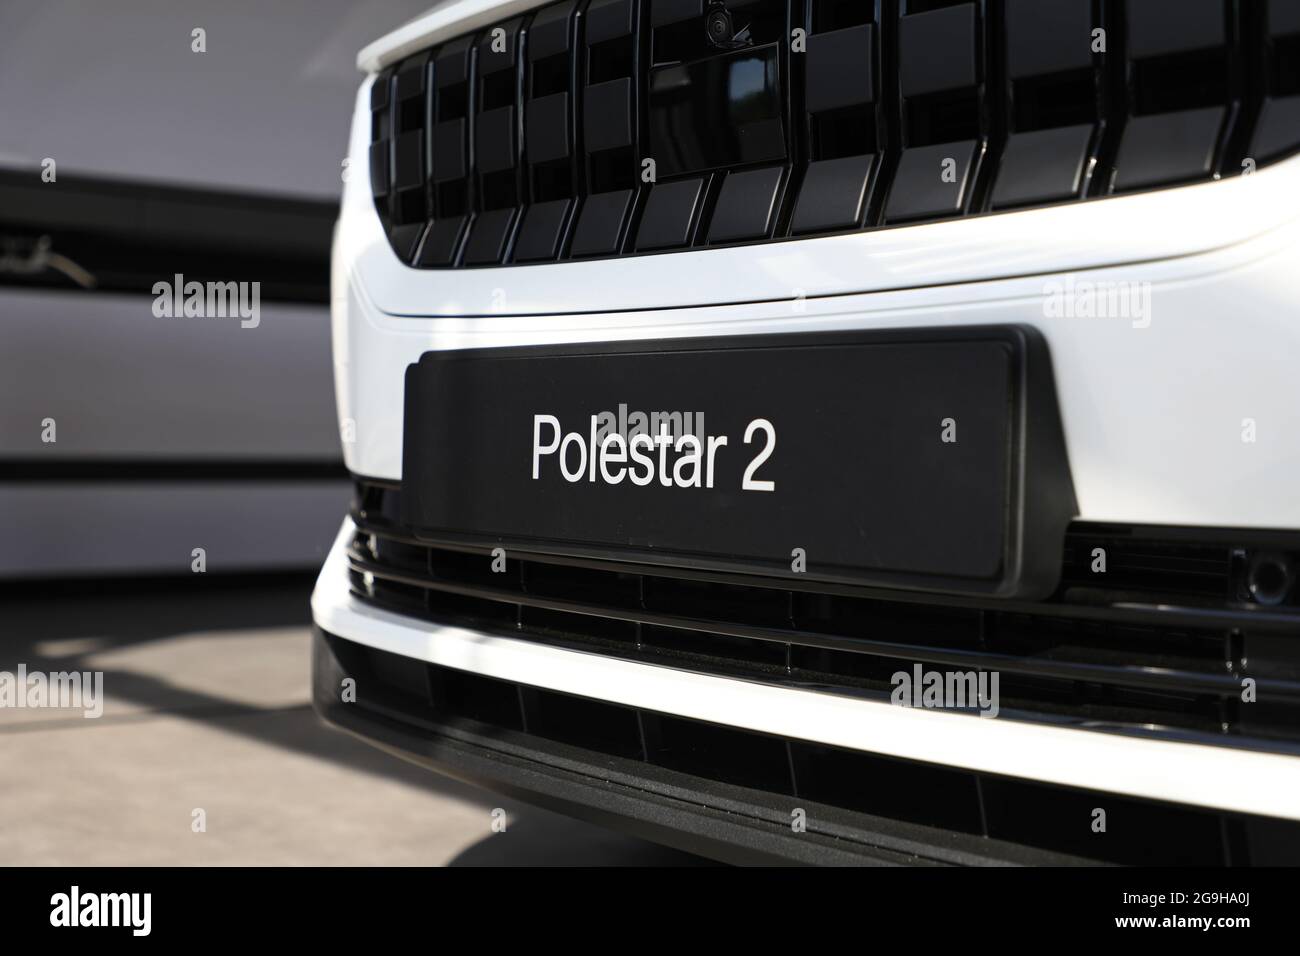 During July, August and September, Volvo Cars and the sister brand Polestar will offer free fast charging for all electric cars in Mjölby. A Polestar 2 at the area. Stock Photo